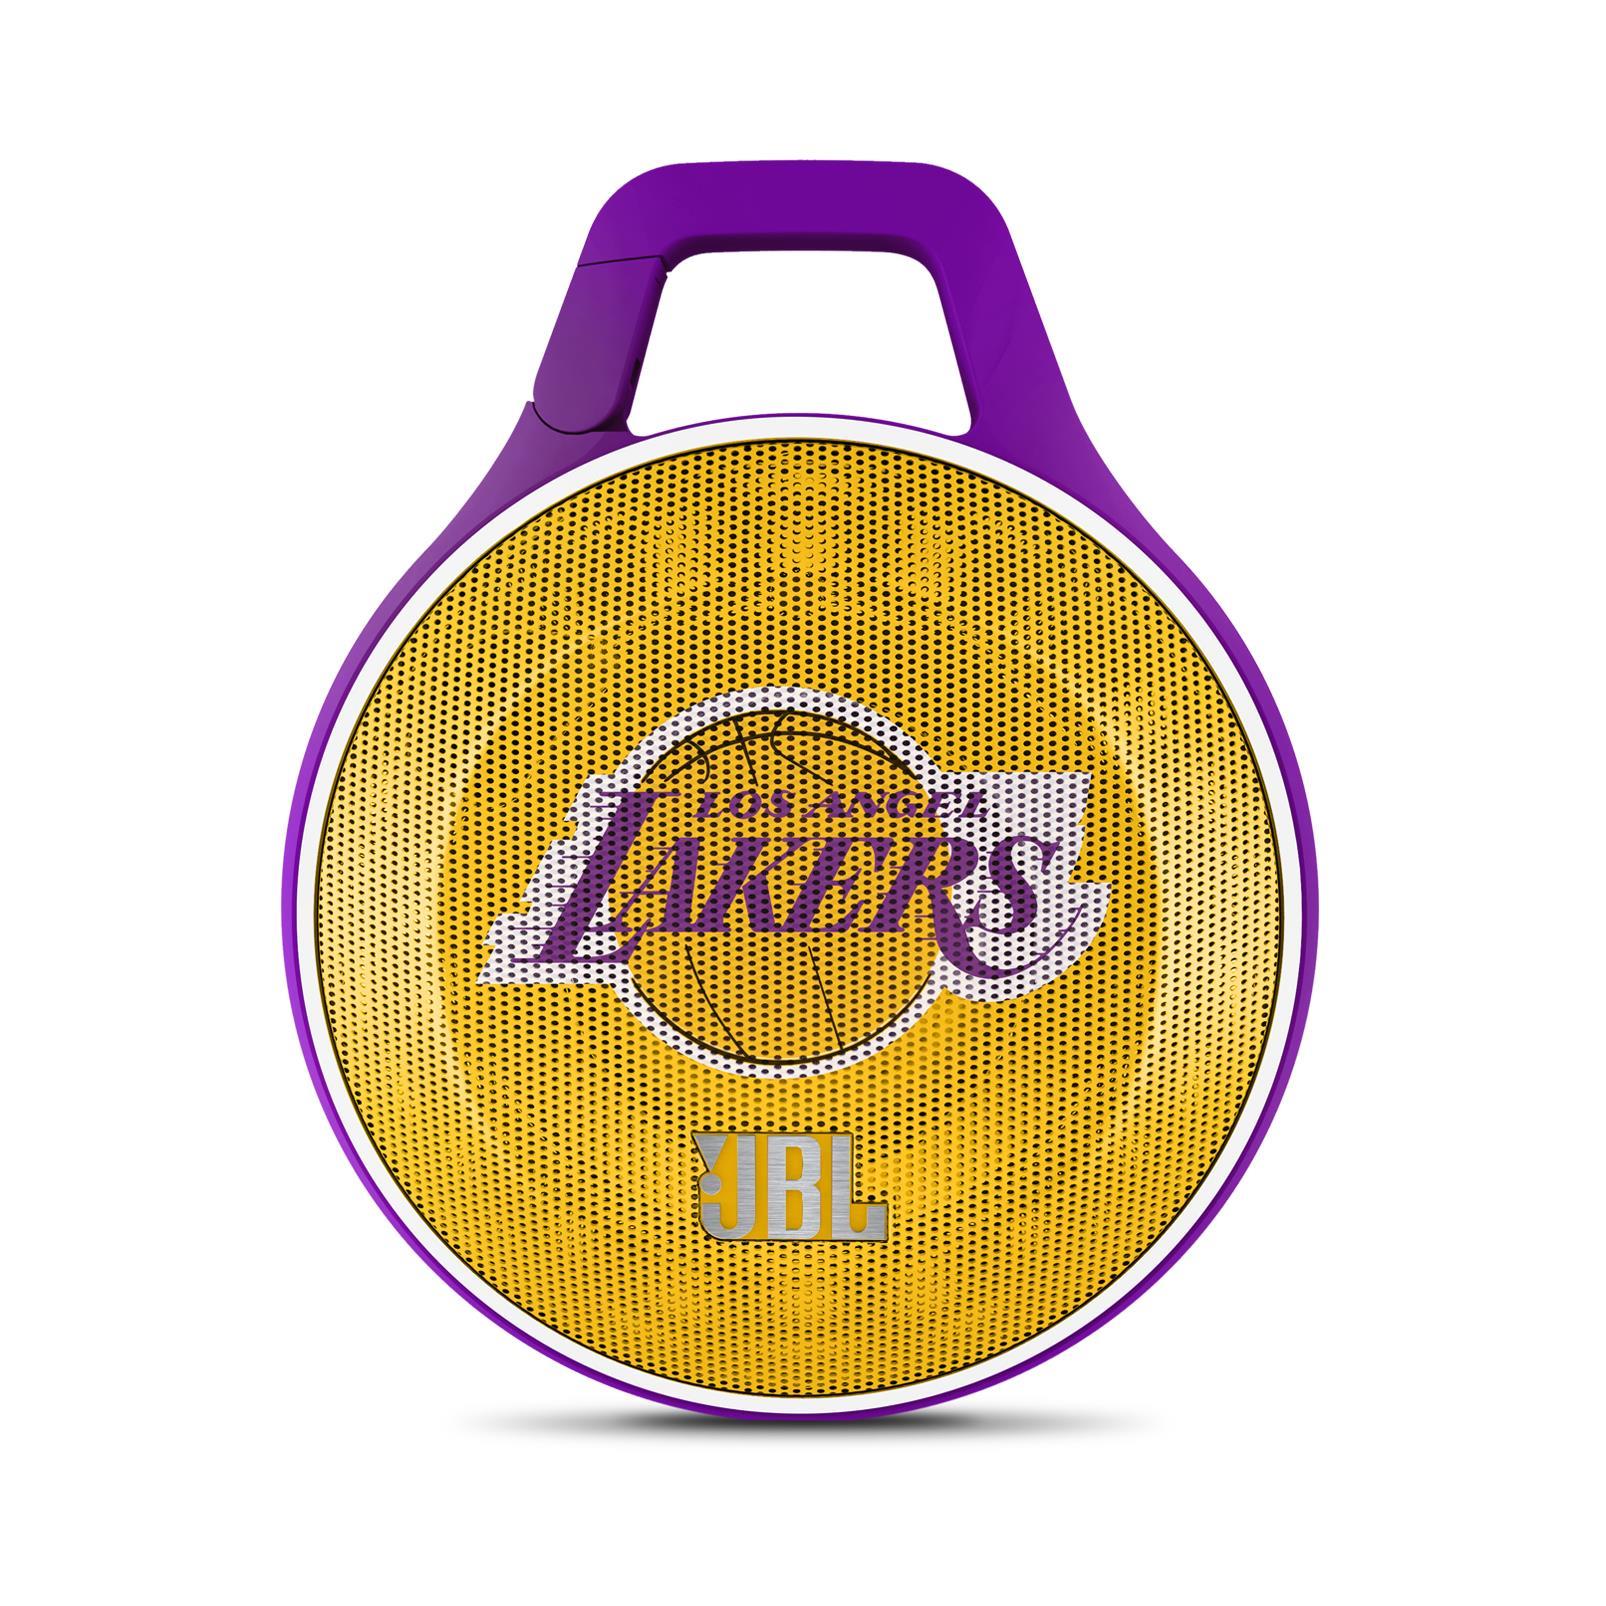 JBL Clip NBA Edition Portable Bluetooth Speaker with Integrated Carabiner (New York Knicks)